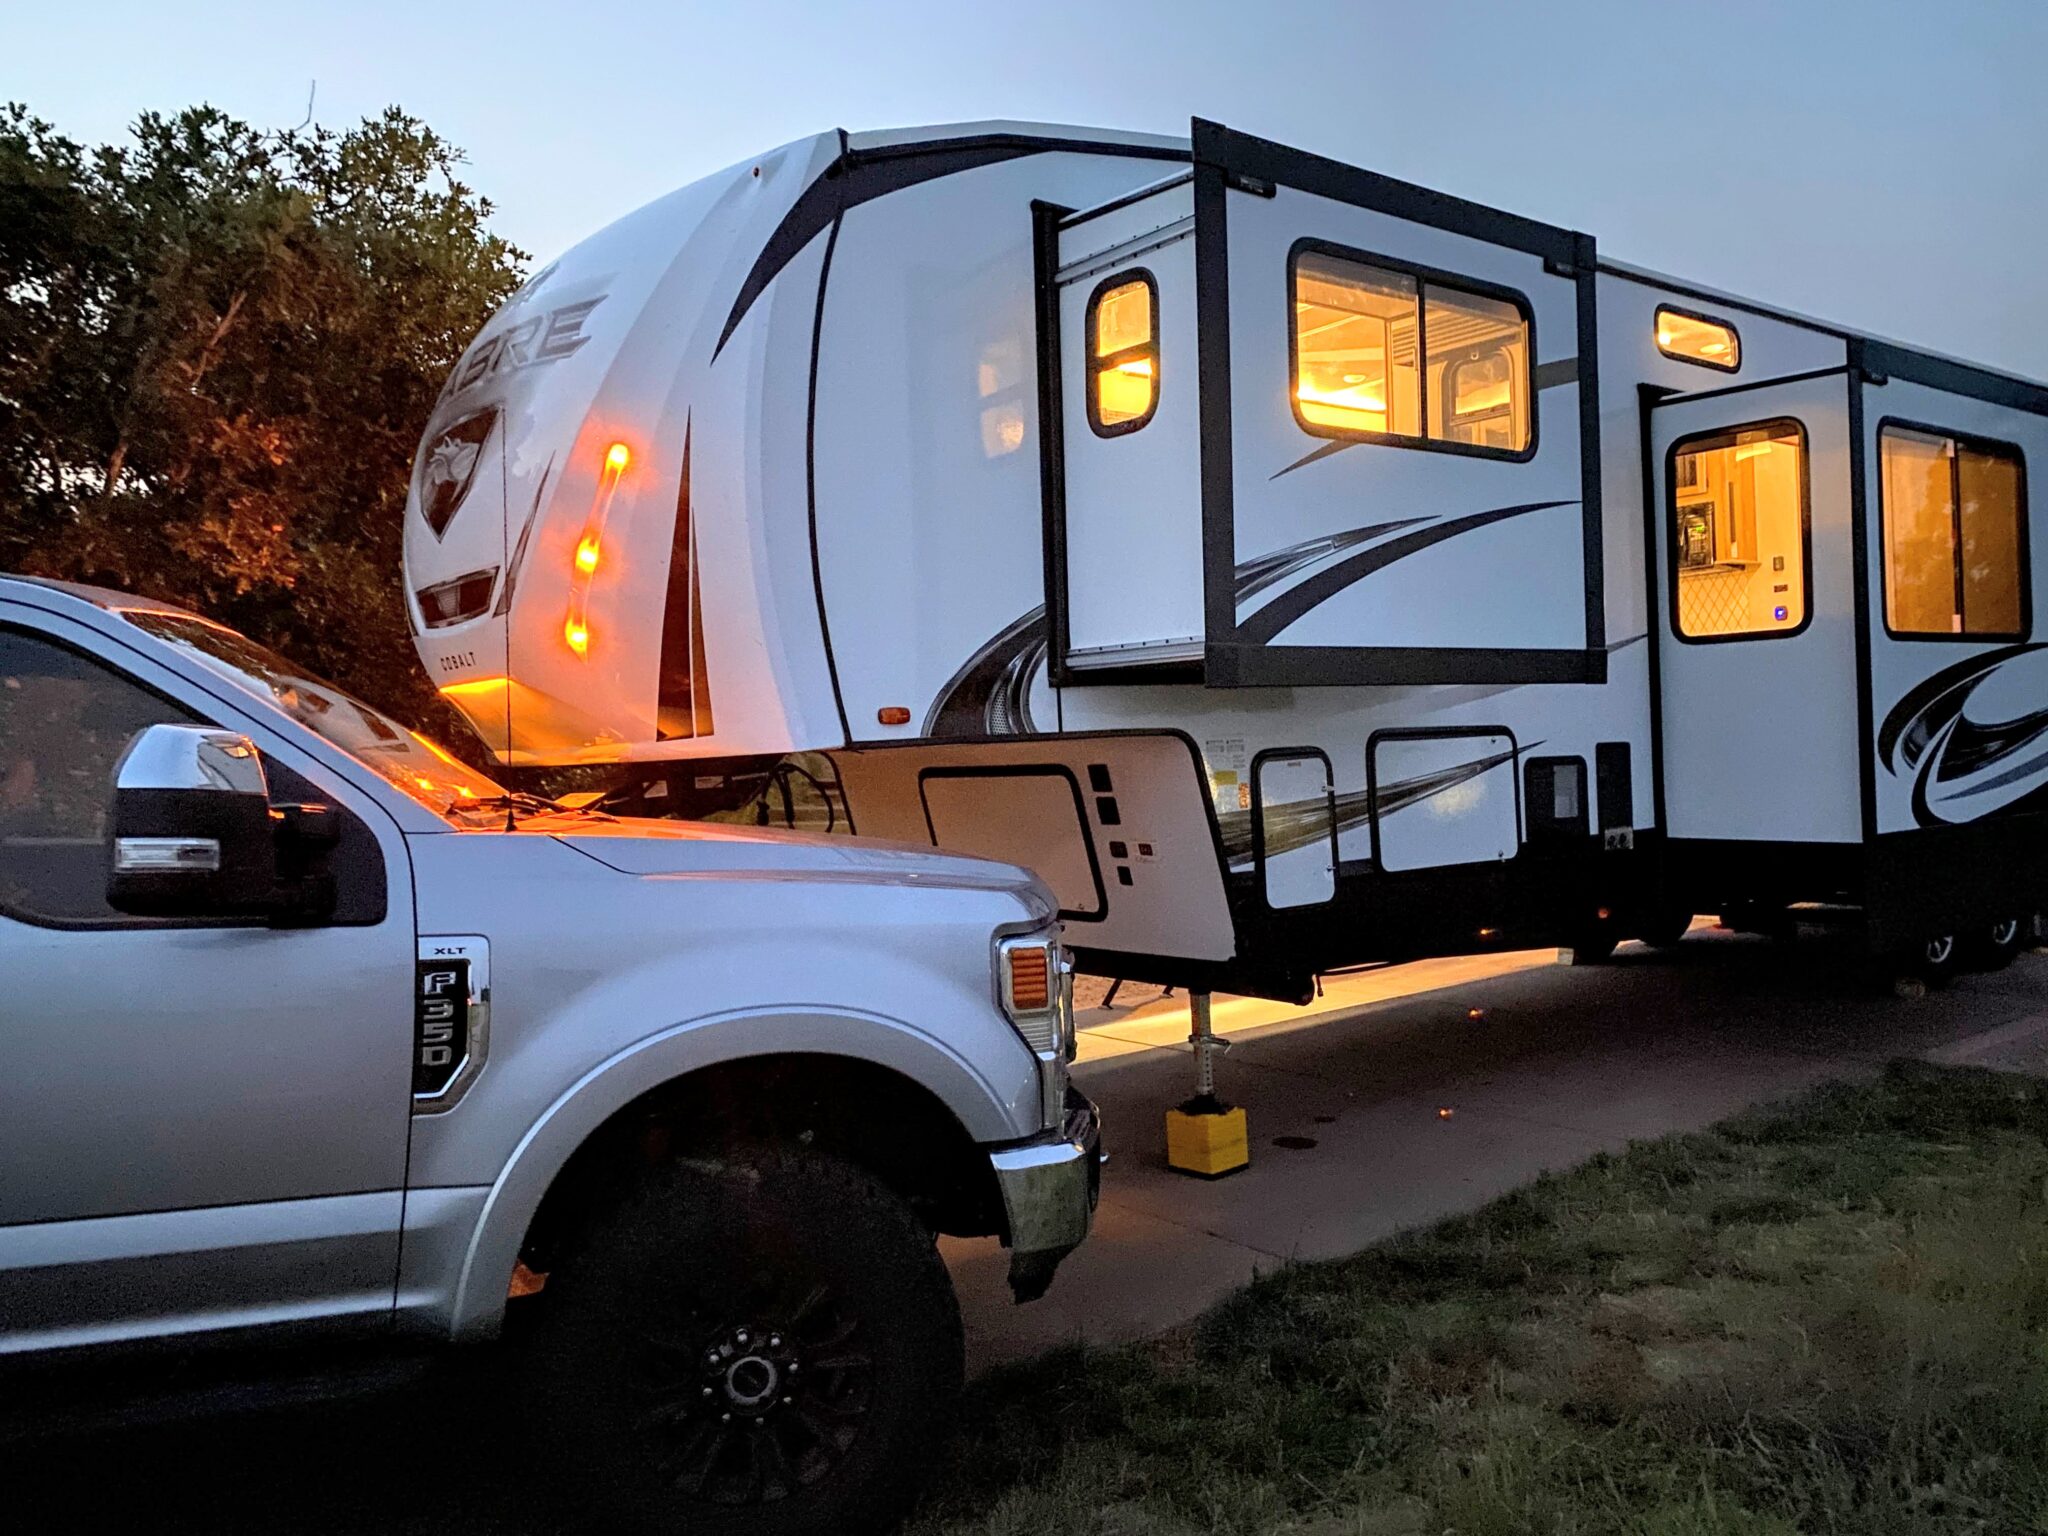 How to Determine if an RV Can Fit in a Campsite